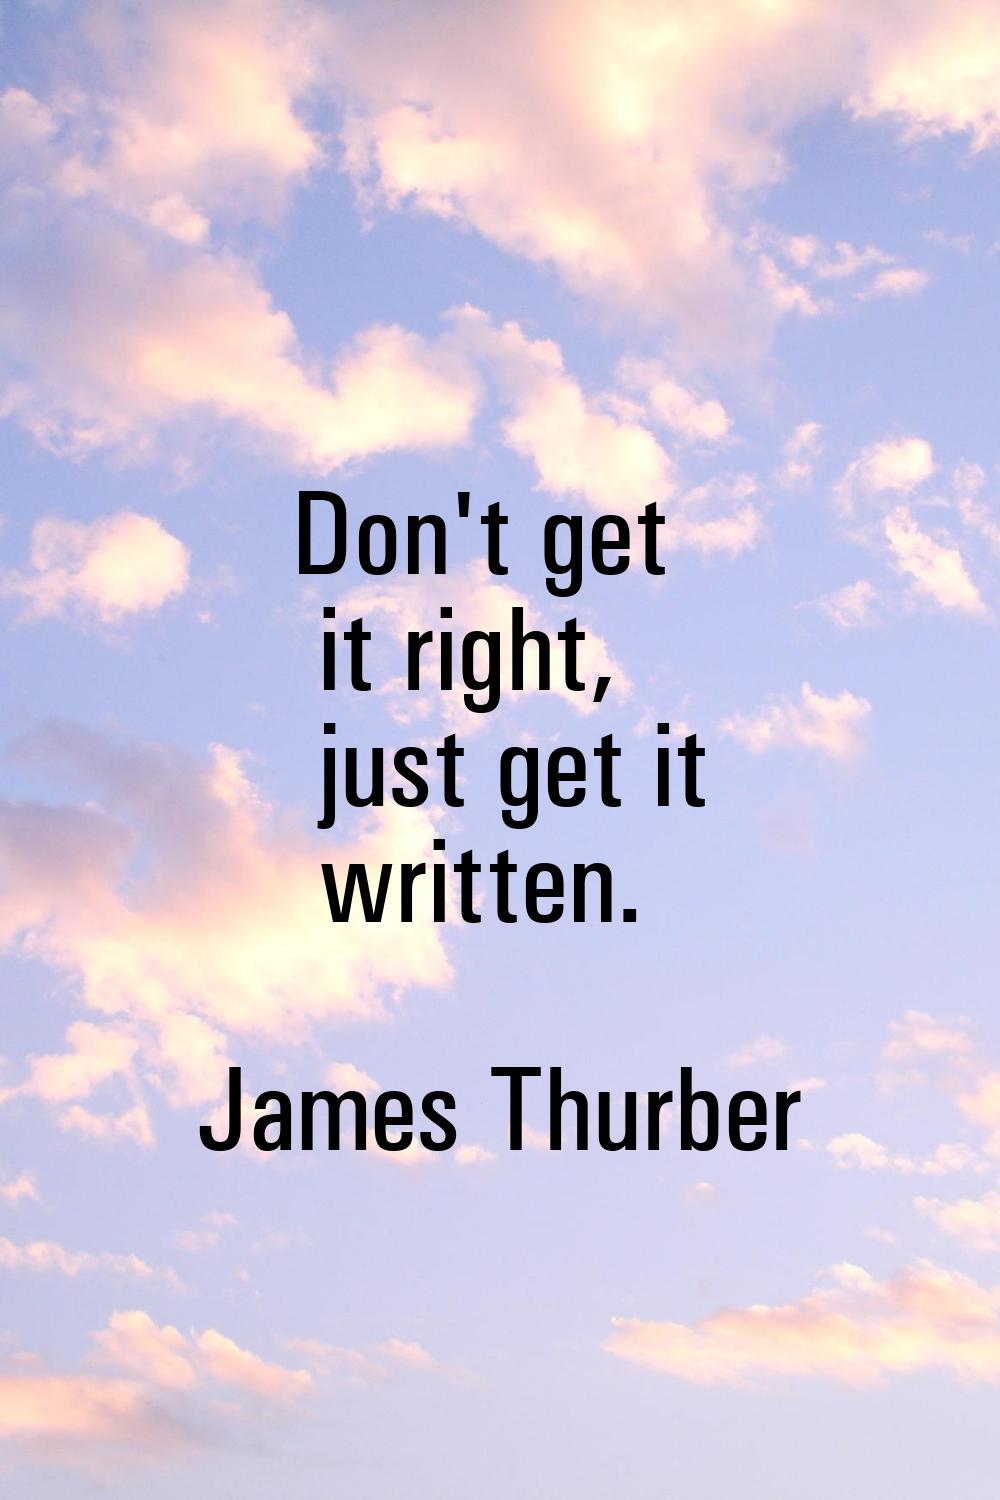 Don't get it right, just get it written.